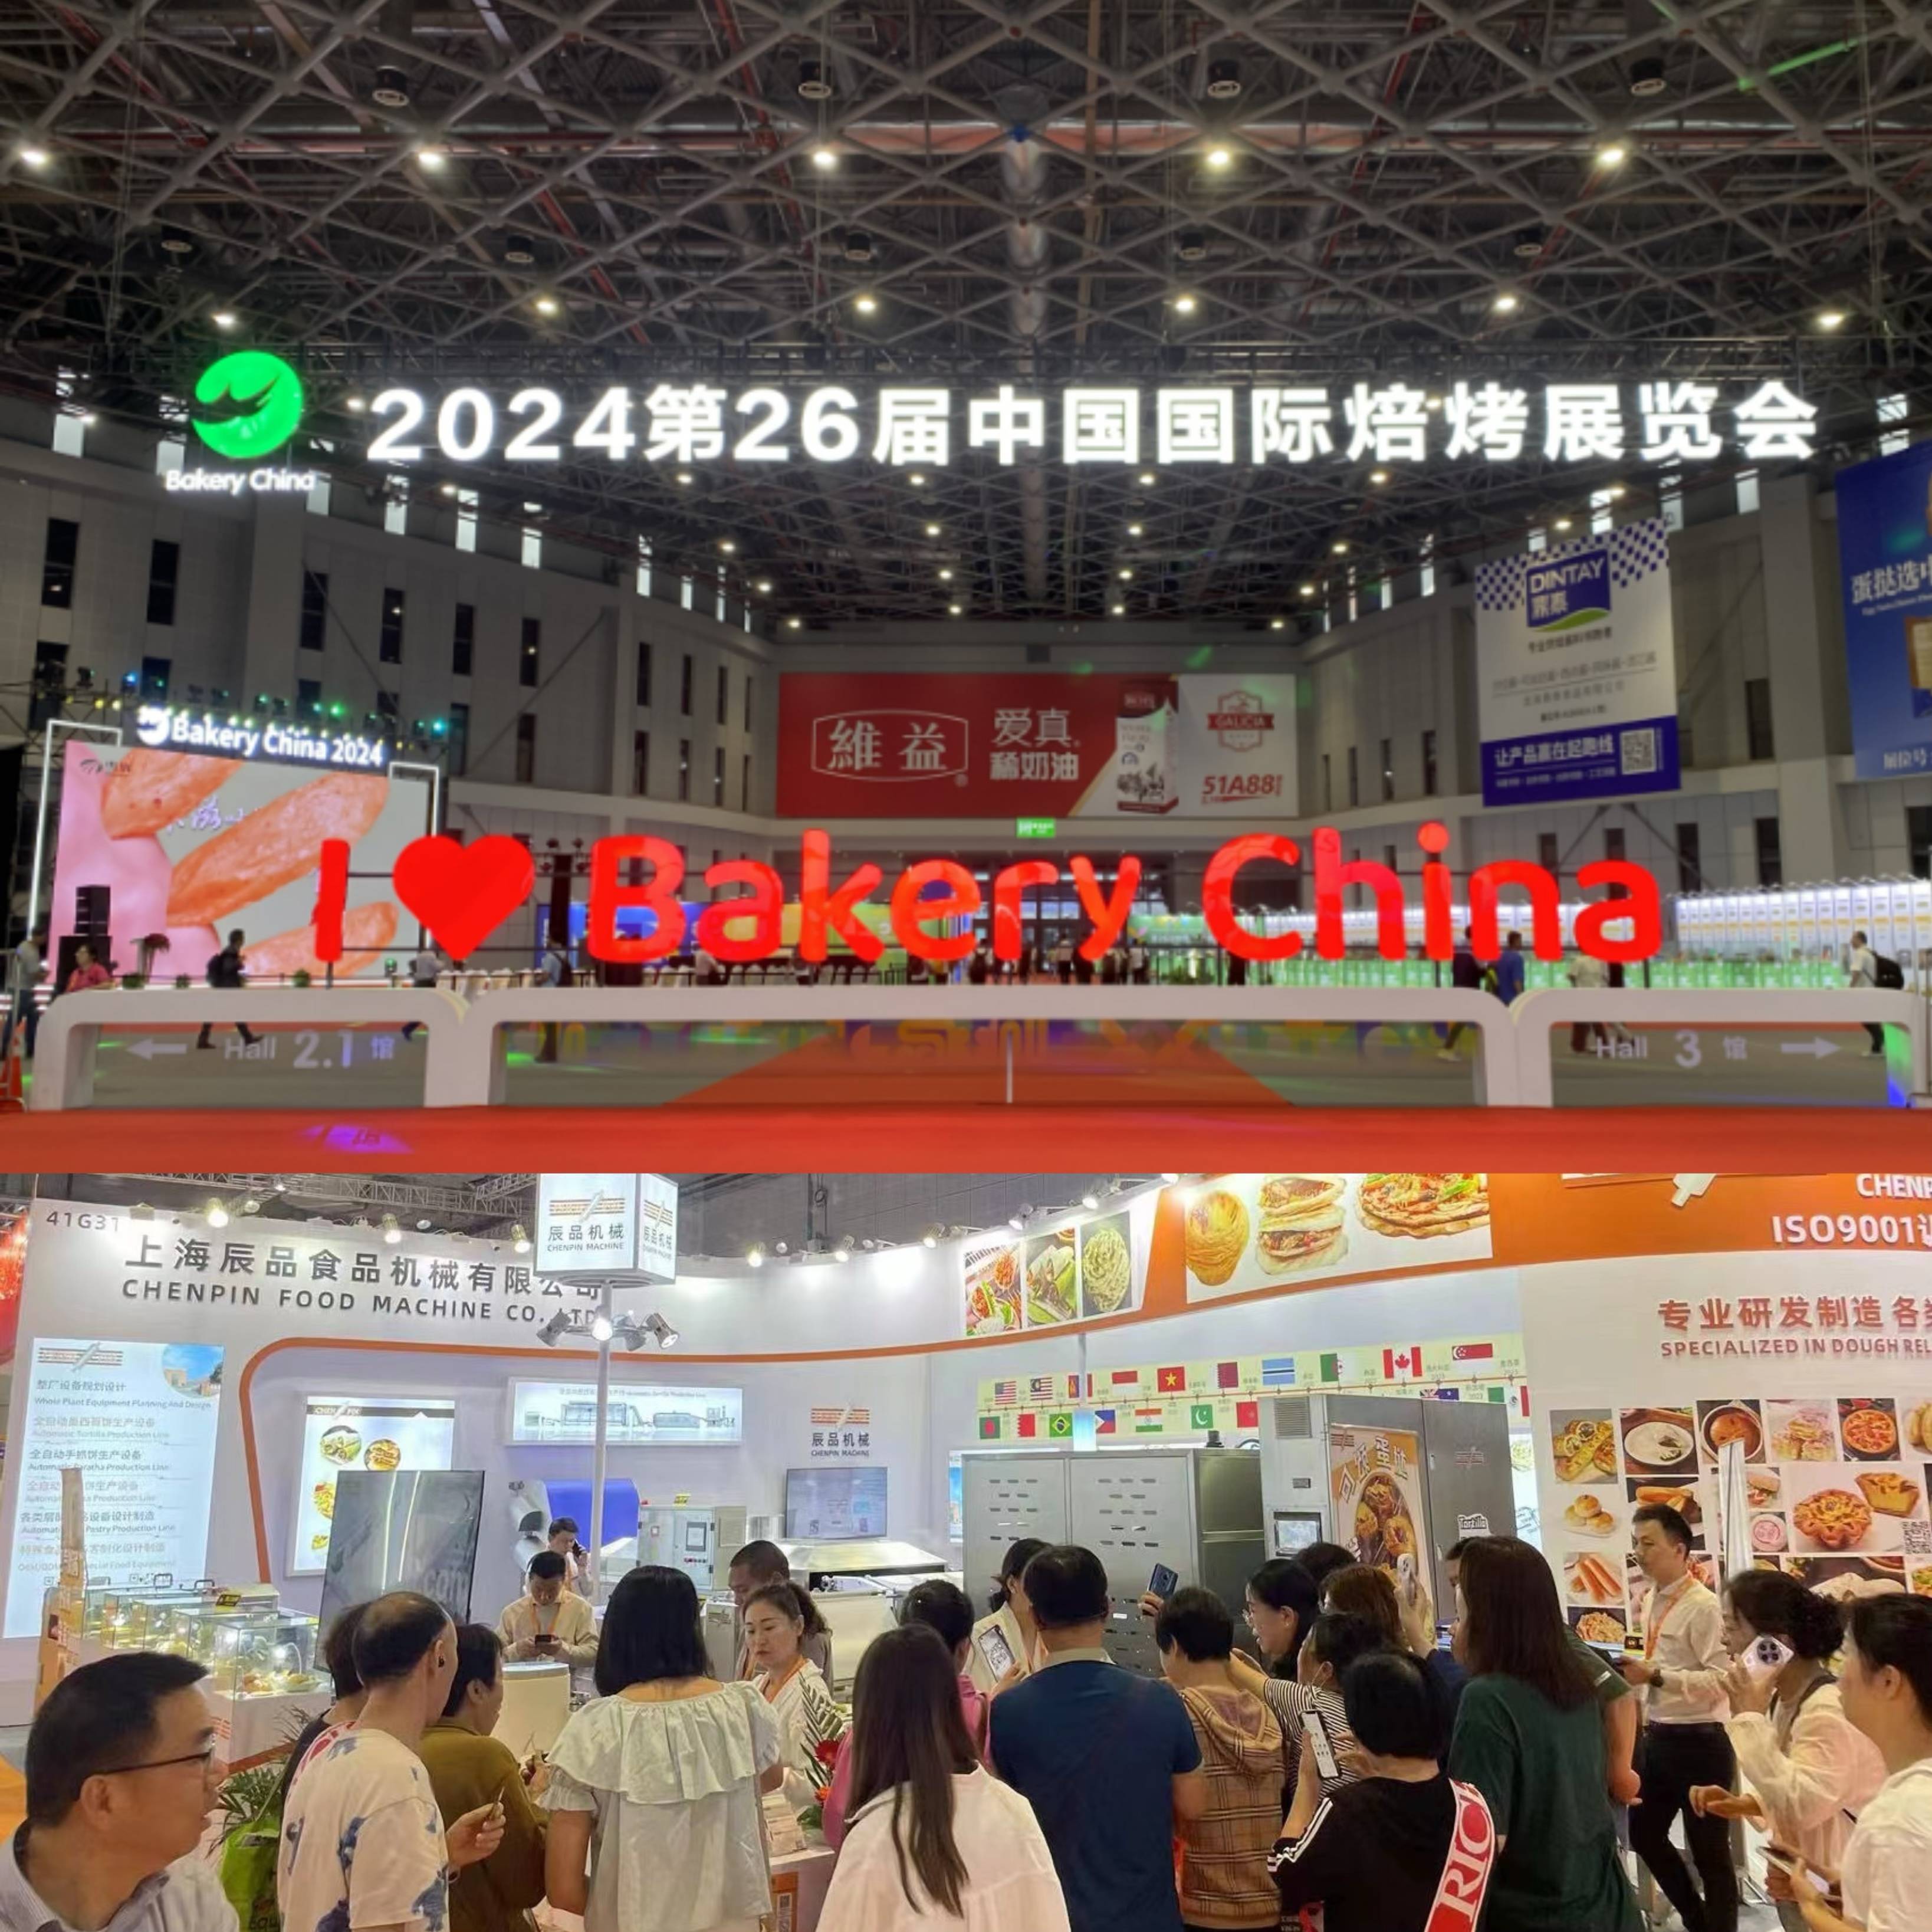 The grand event of the exhibition | Shanghai Chenpin Food Machinery at the 26th China International Bakery Exhibition 2024.